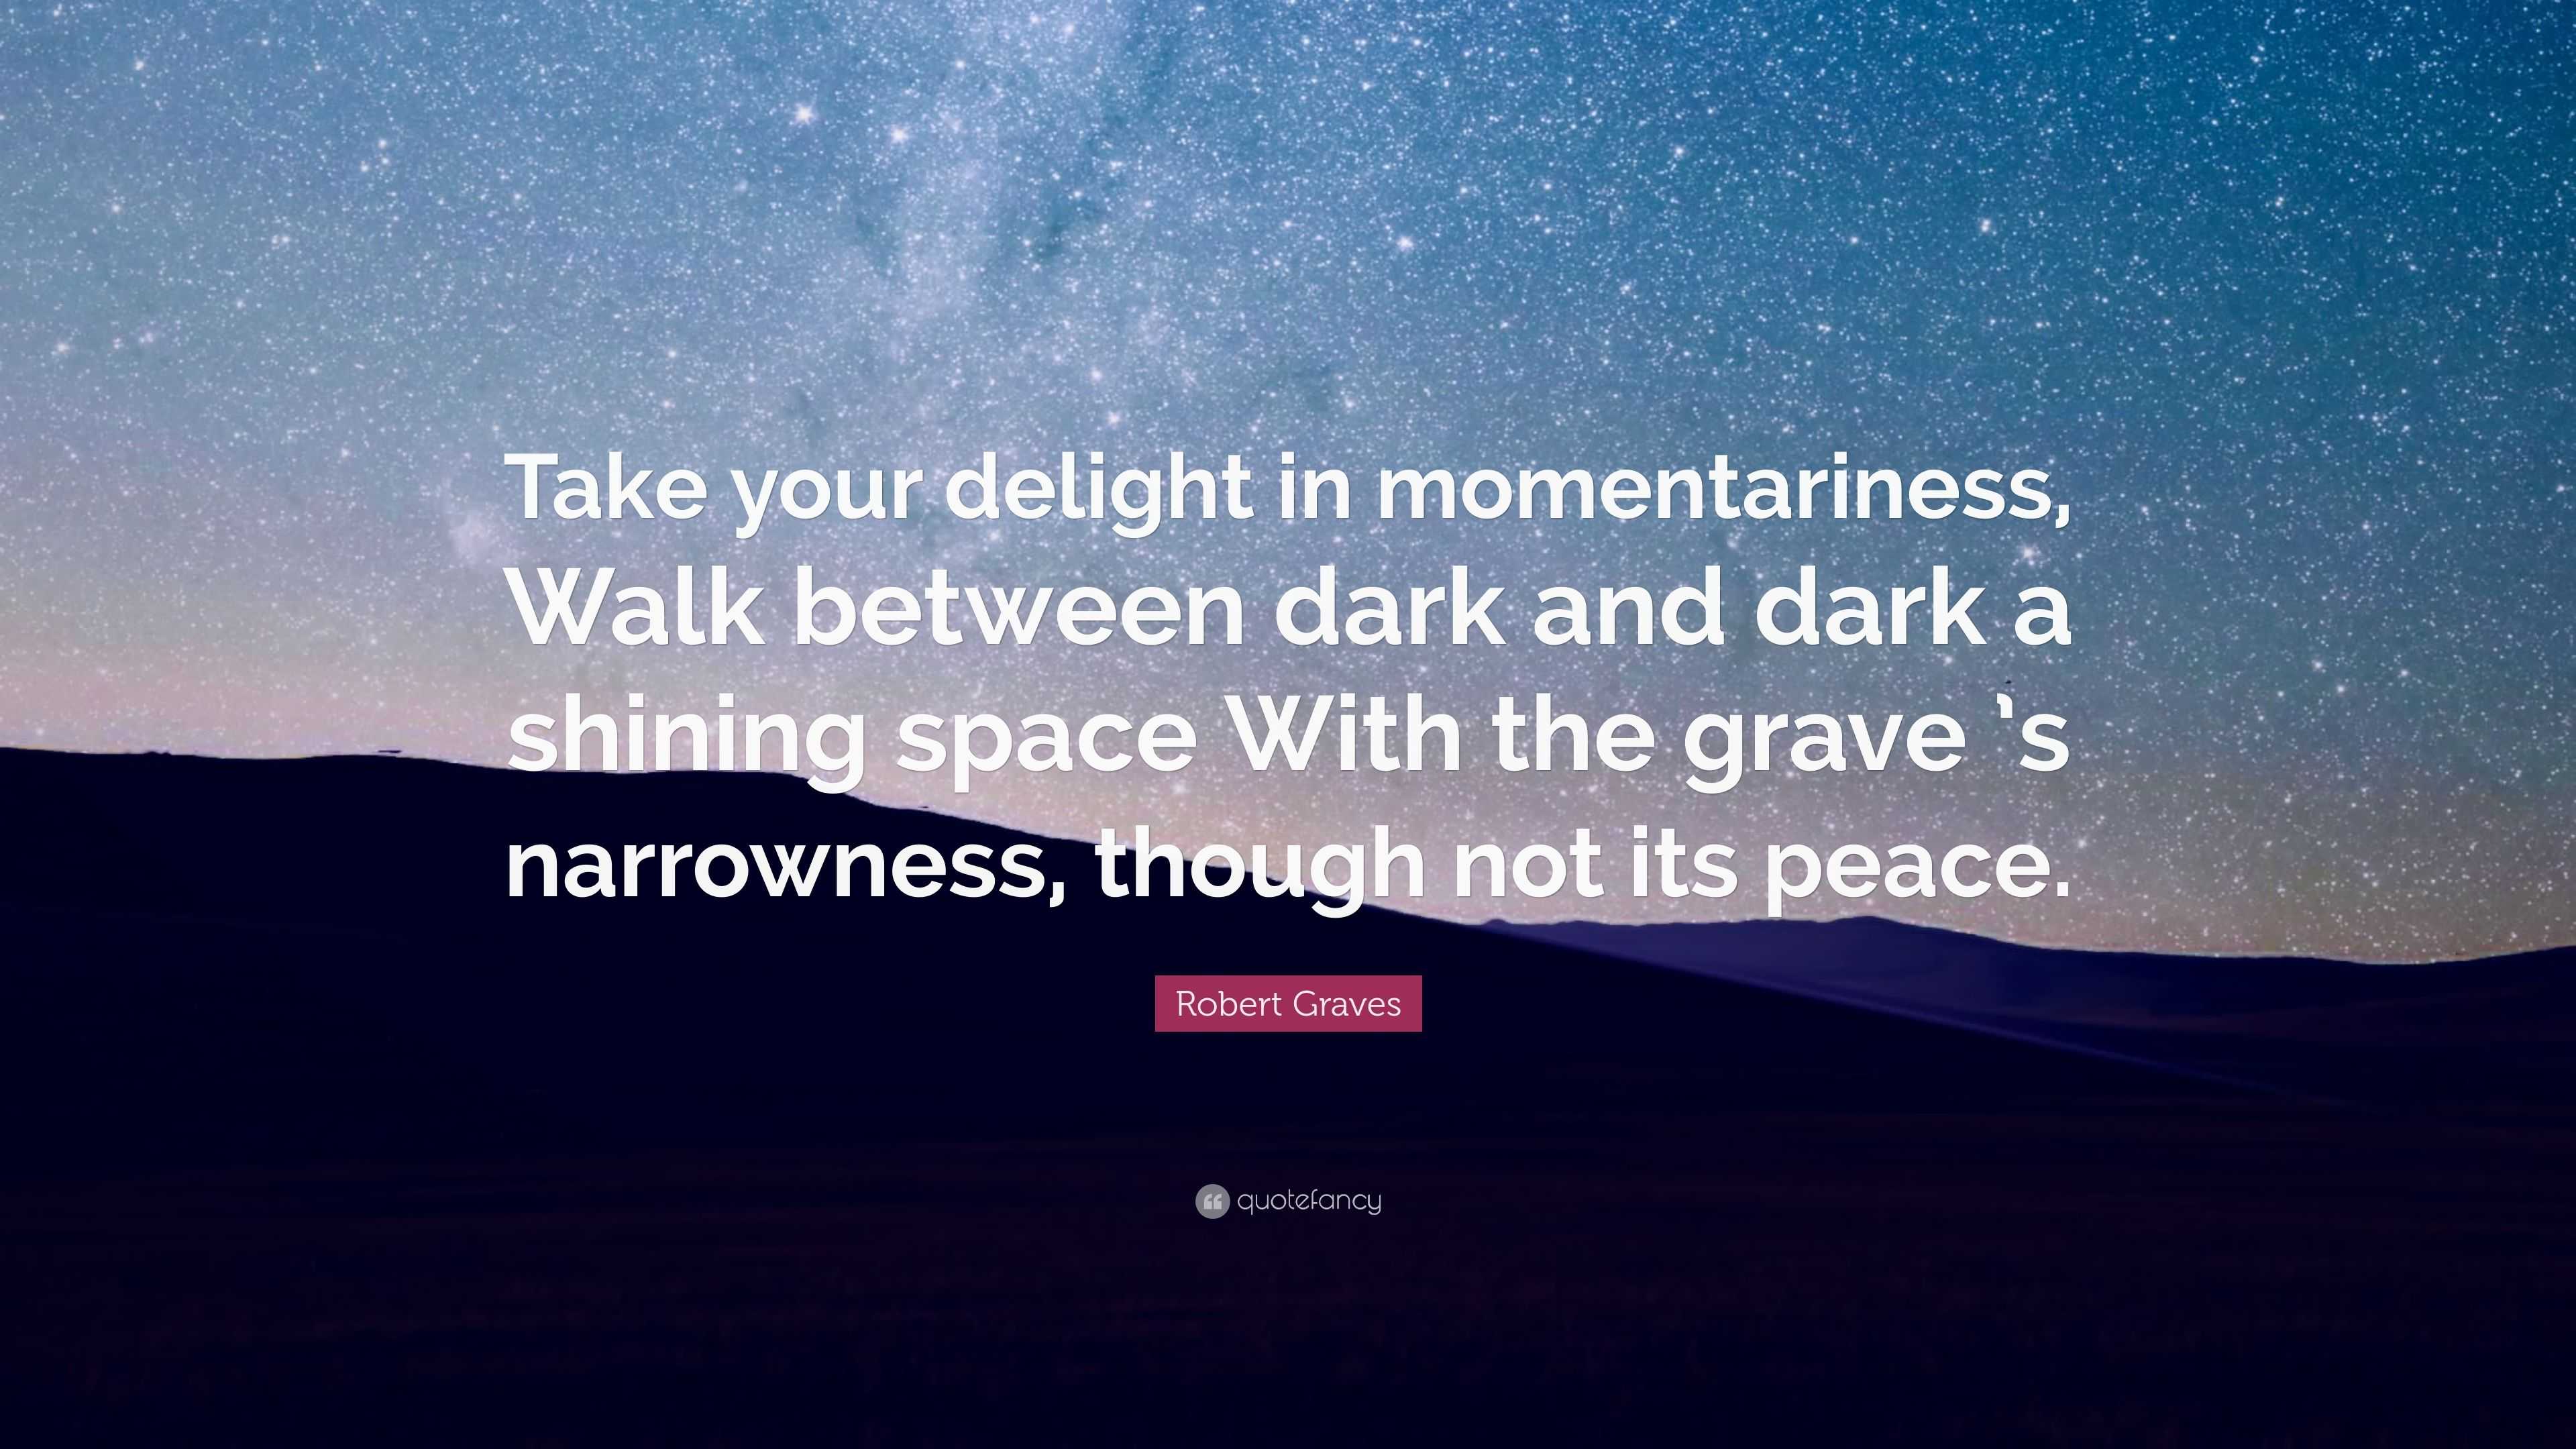 Robert Graves Quote: “Take your delight in momentariness, Walk between ...